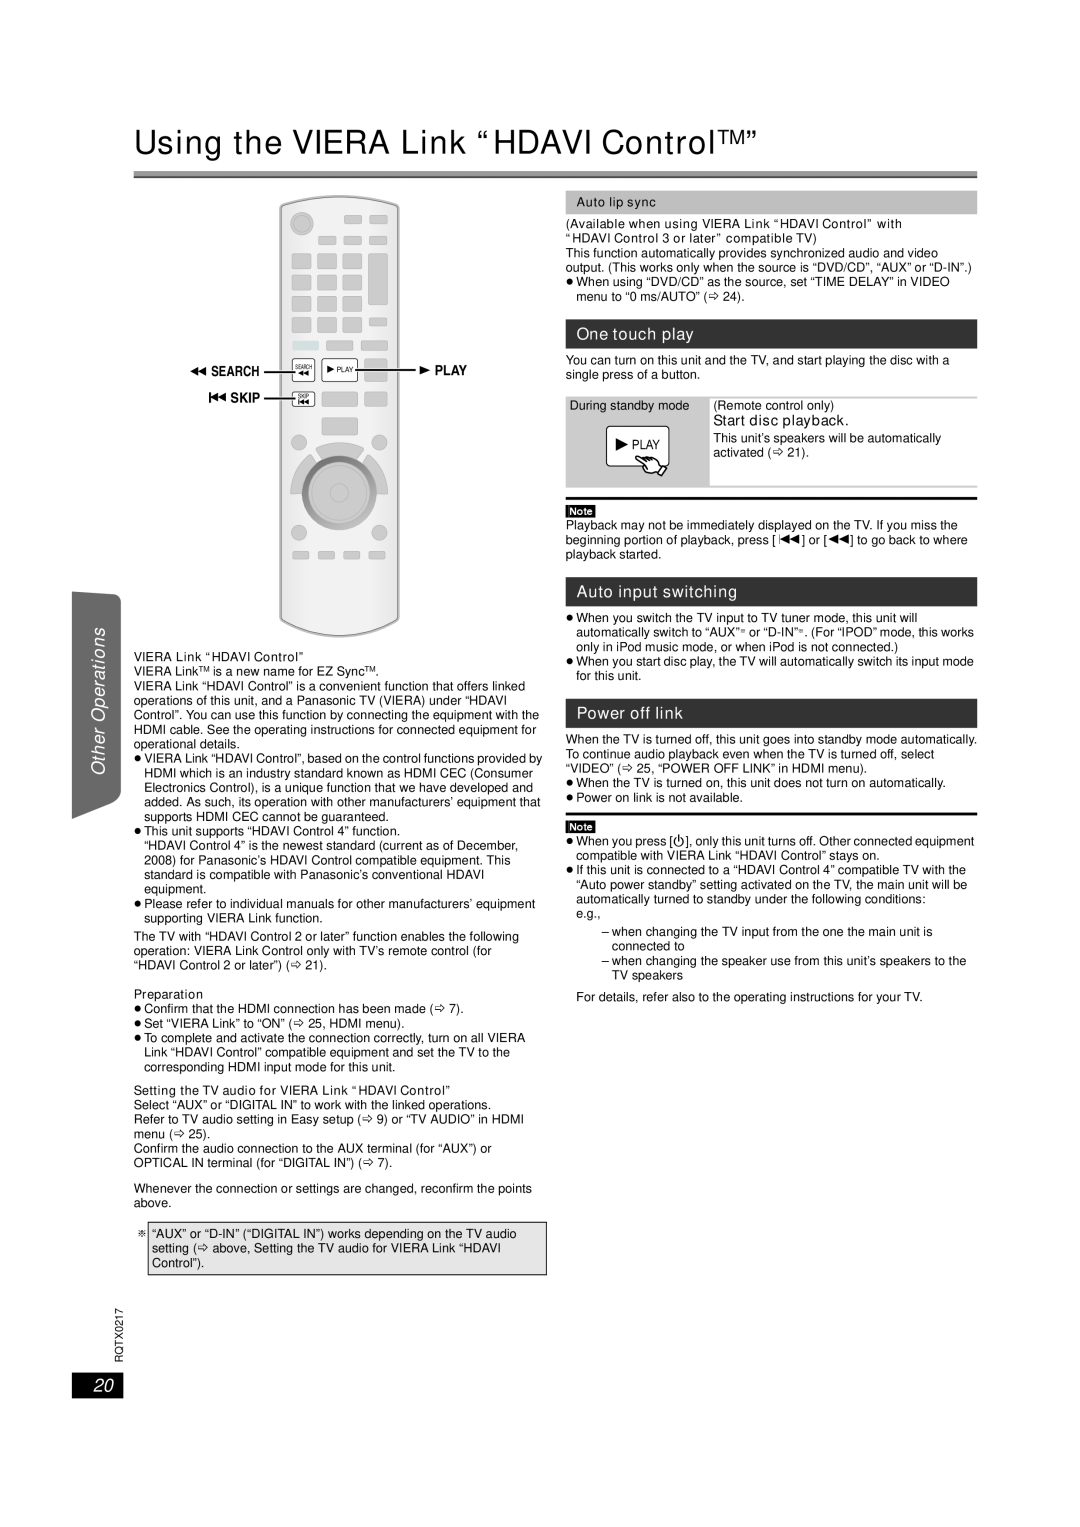 Panasonic SC-PT464 Using the VIERA Link “HDAVI ControlTM”, One touch play, Auto input switching, Power off link, Skip 